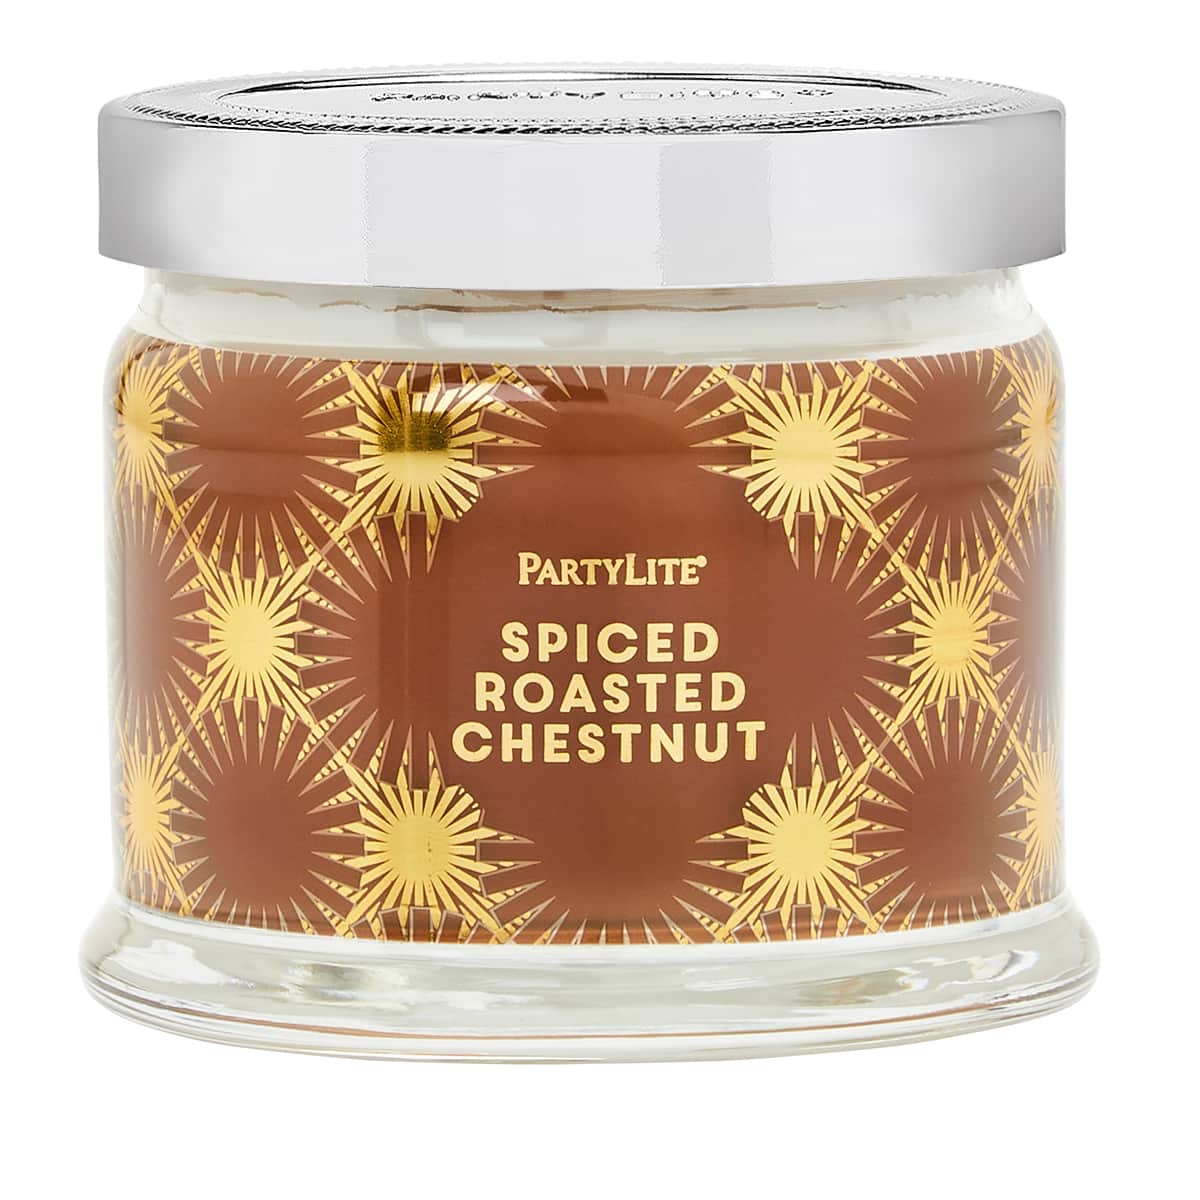 Spiced Roasted Chestnut 3-Wick Jar Candle